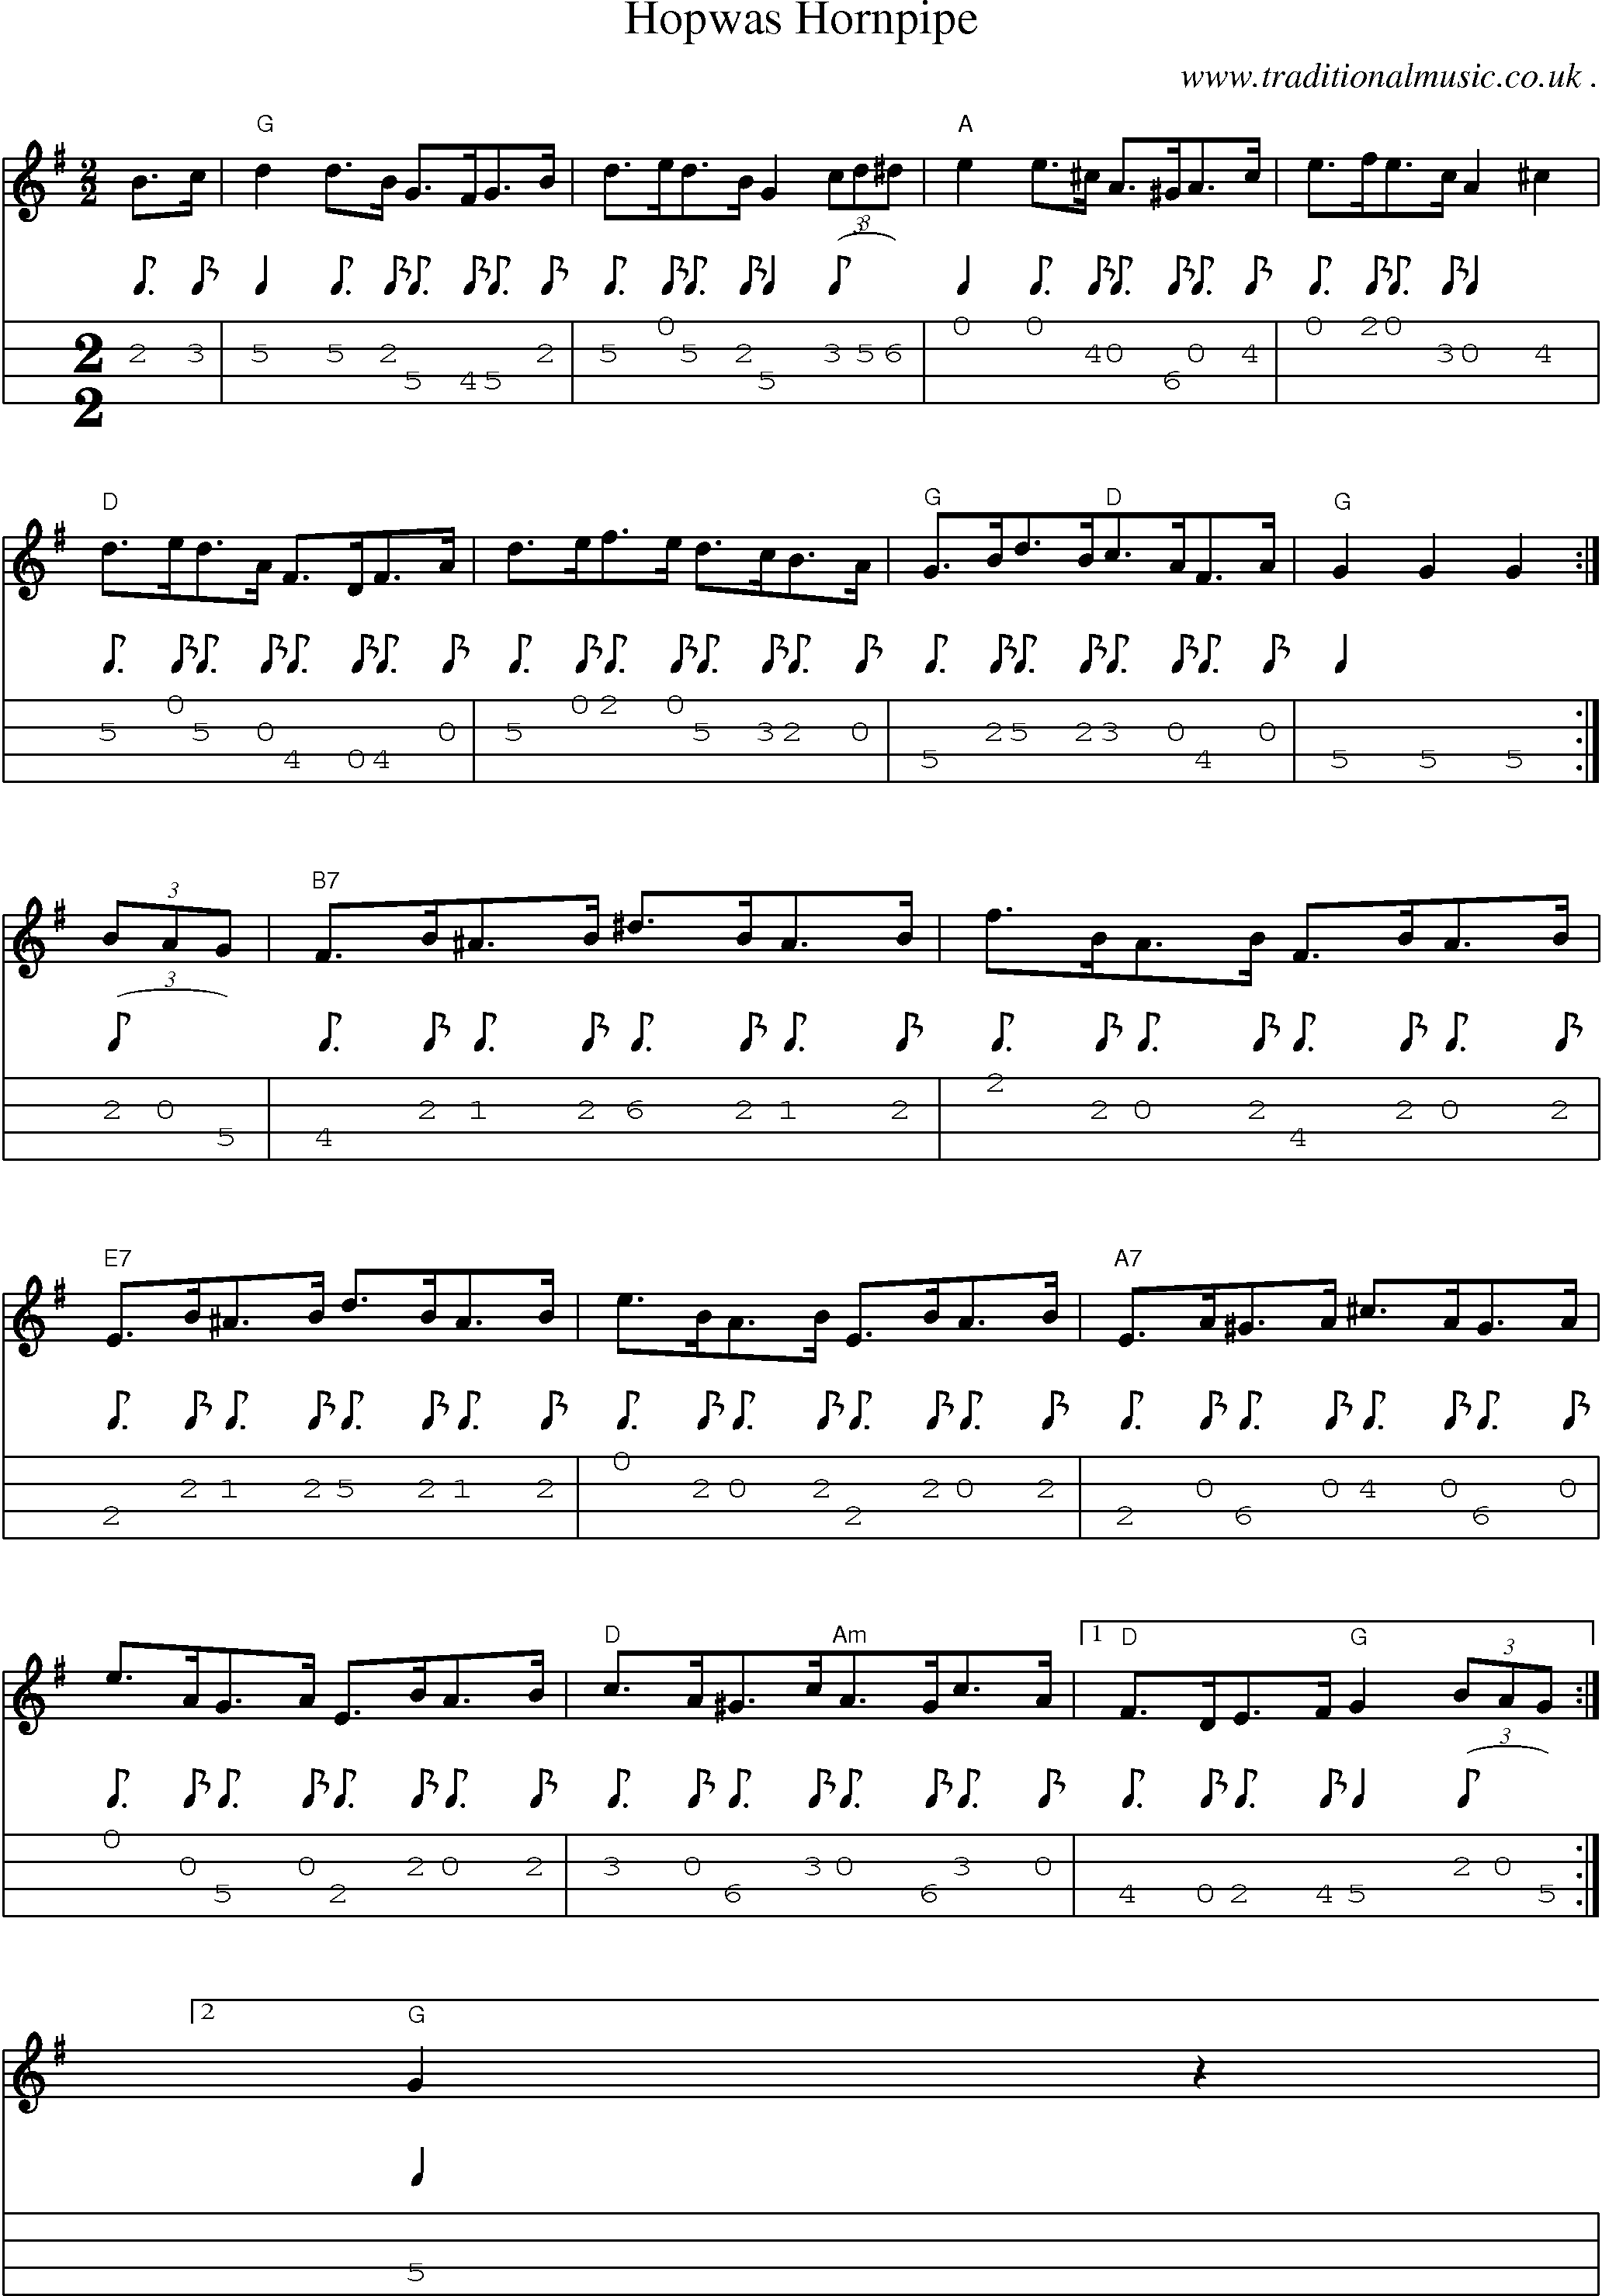 Sheet-Music and Mandolin Tabs for Hopwas Hornpipe